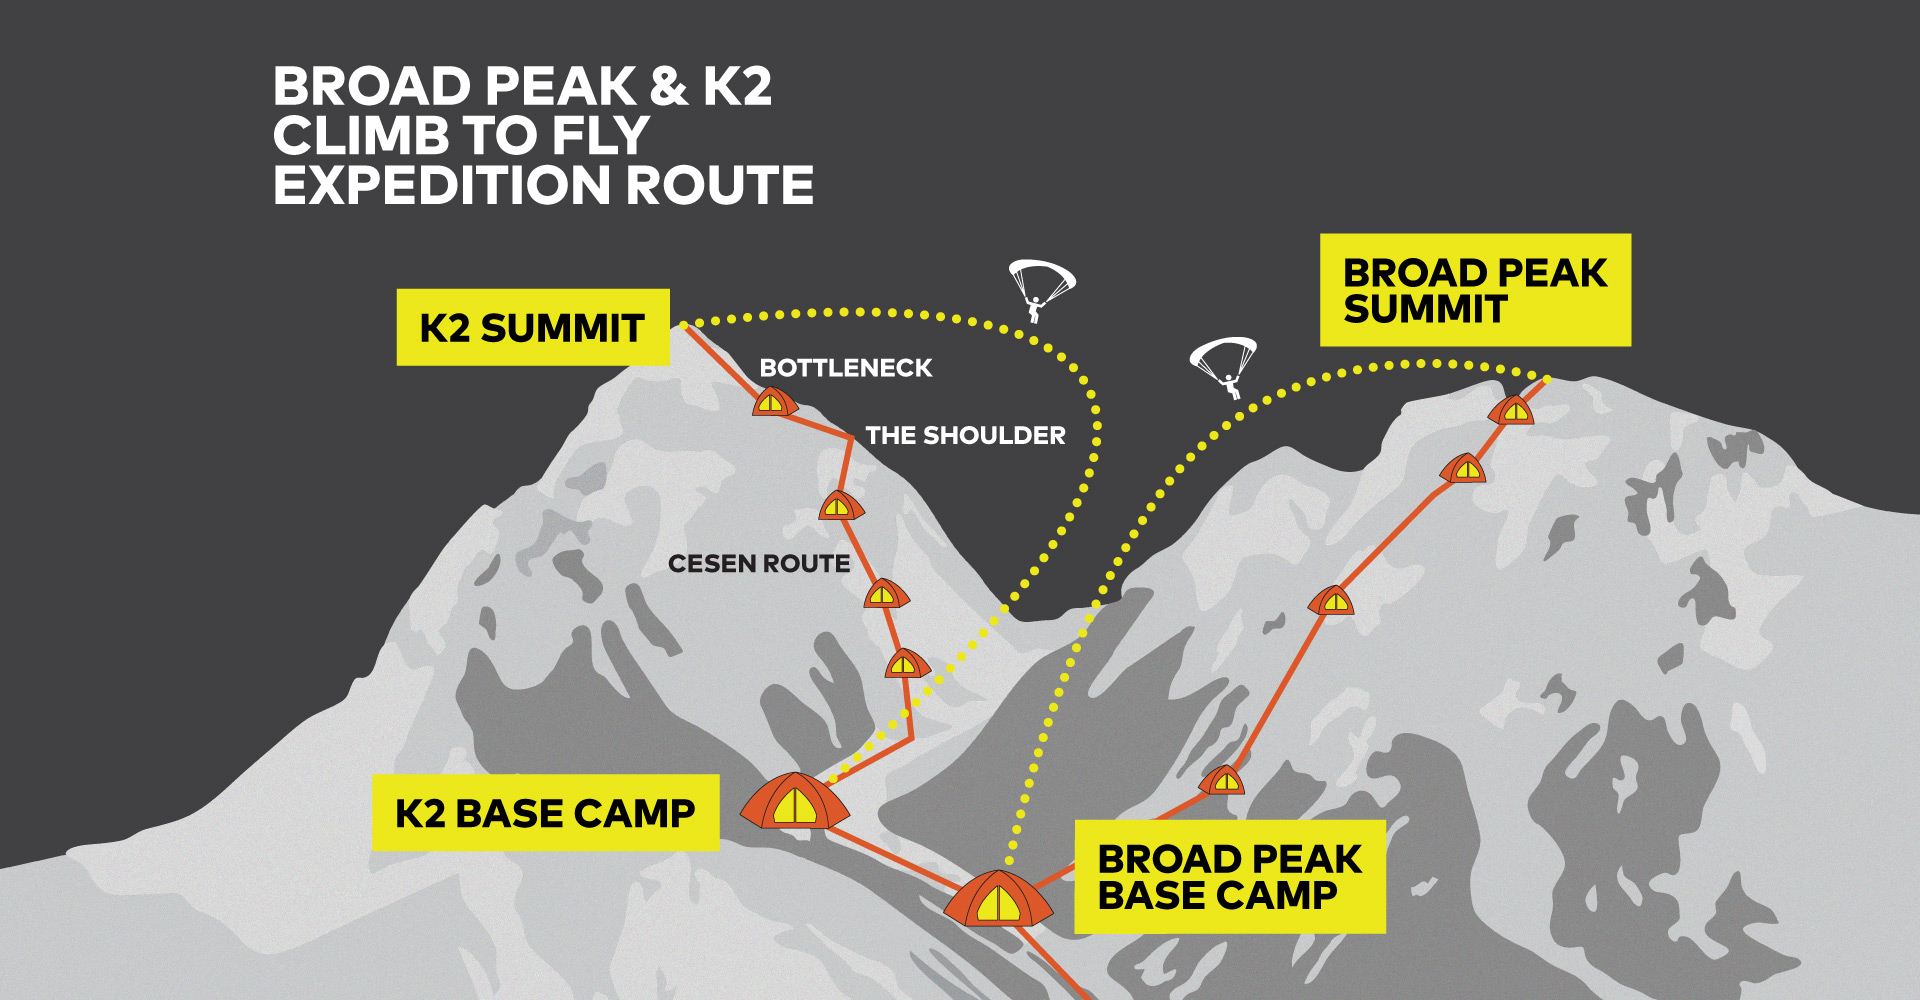 Broad Peak & K2 Expedition Route